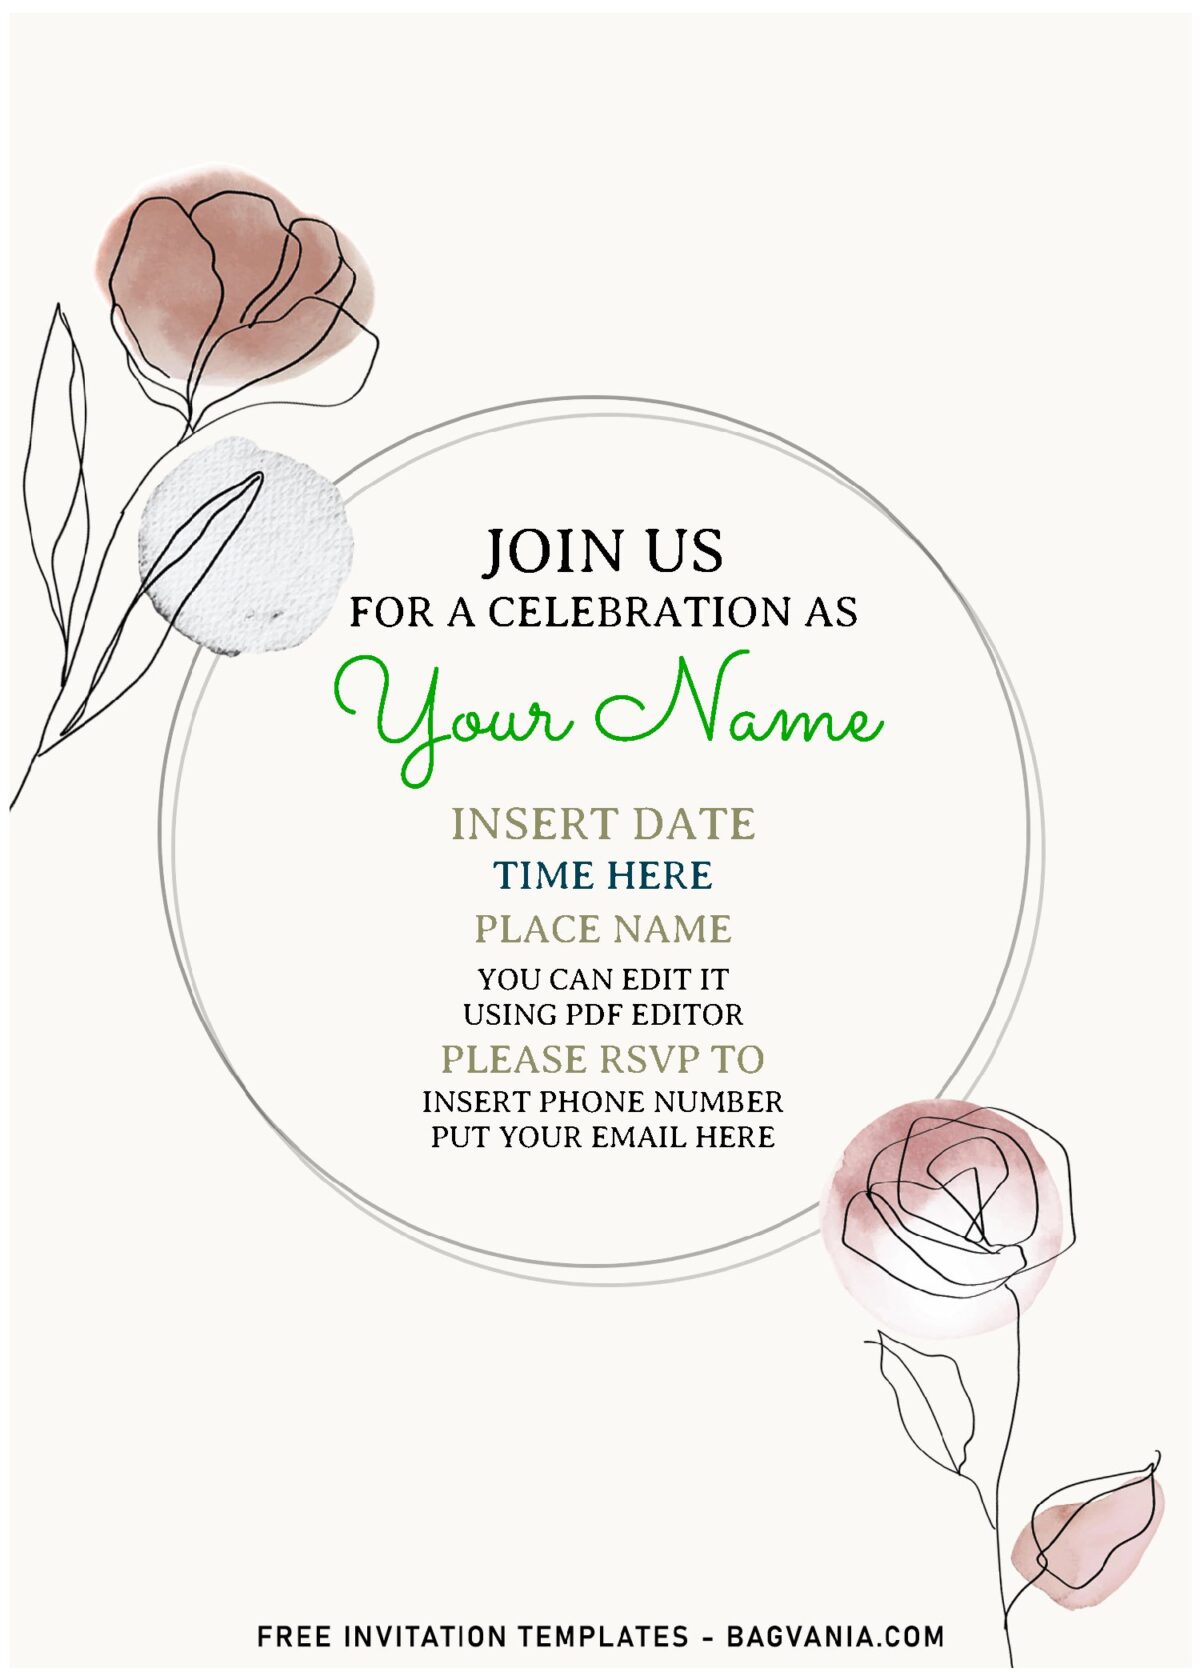 (Free Editable PDF) Artsy Floral Lines Birthday Invitation Templates with watercolor tulips